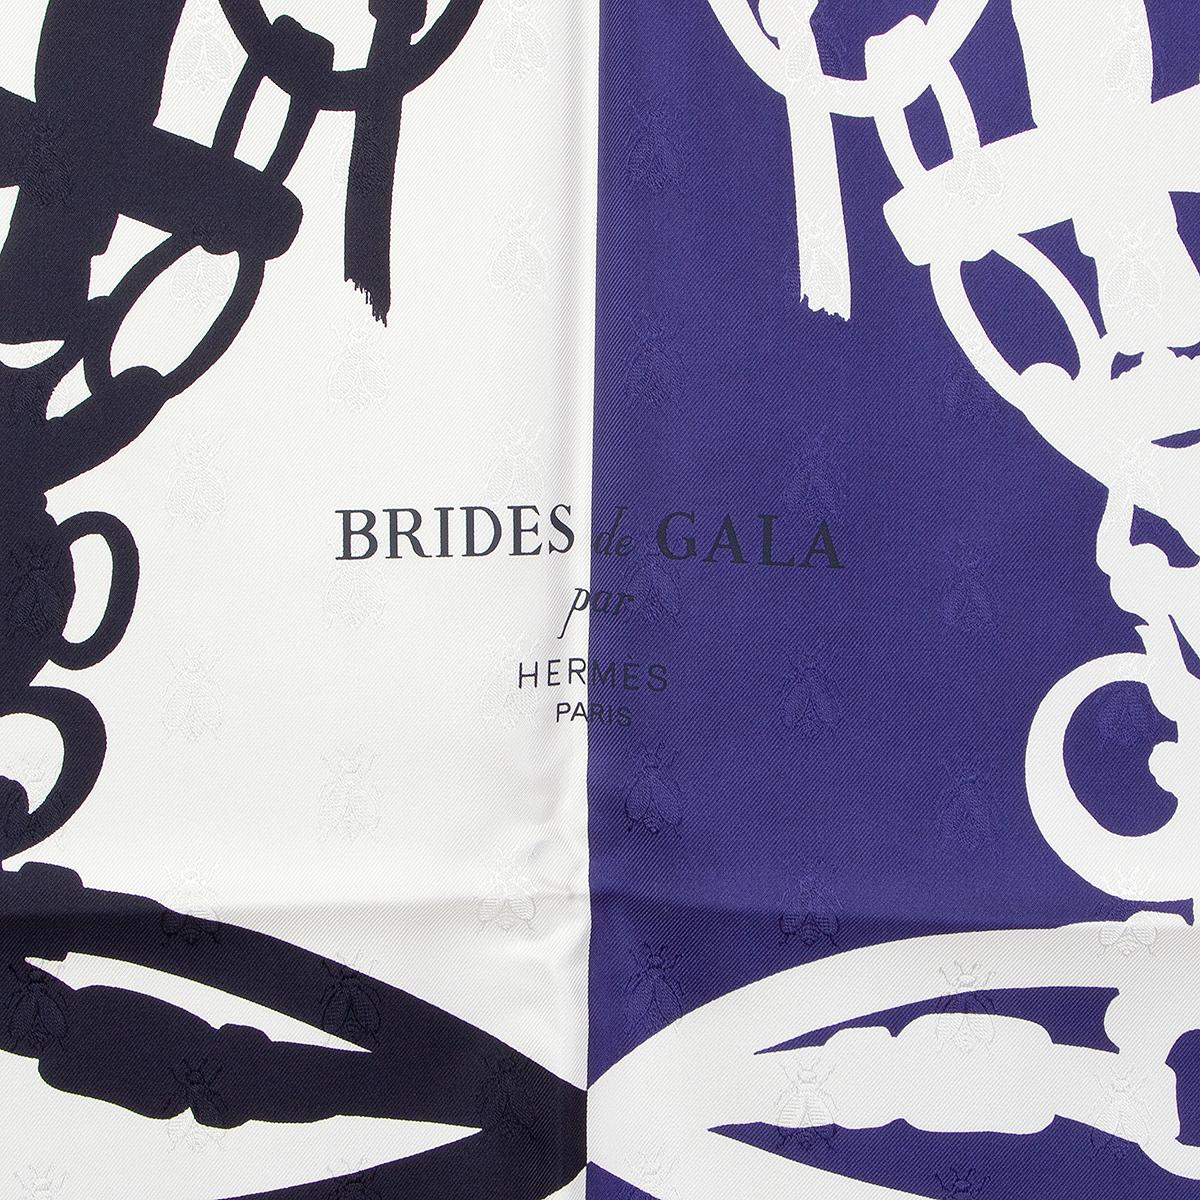 Hermes 'Brides de Gala Quadri Tattoo 90' scarf by Hugy Grykar in white, ink and midnight blue silk (100%) with bee jacquard and contrast ink blue hem. Brand new.

Width 90cm (35.1in)
Height 90cm (35.1in)